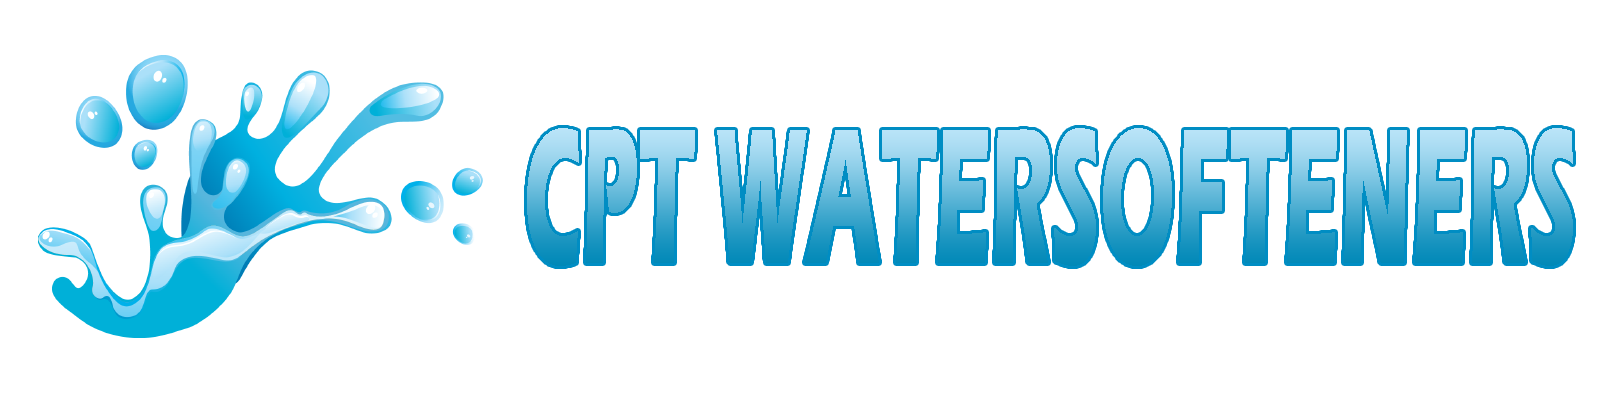 logo cptwatersofteners 1